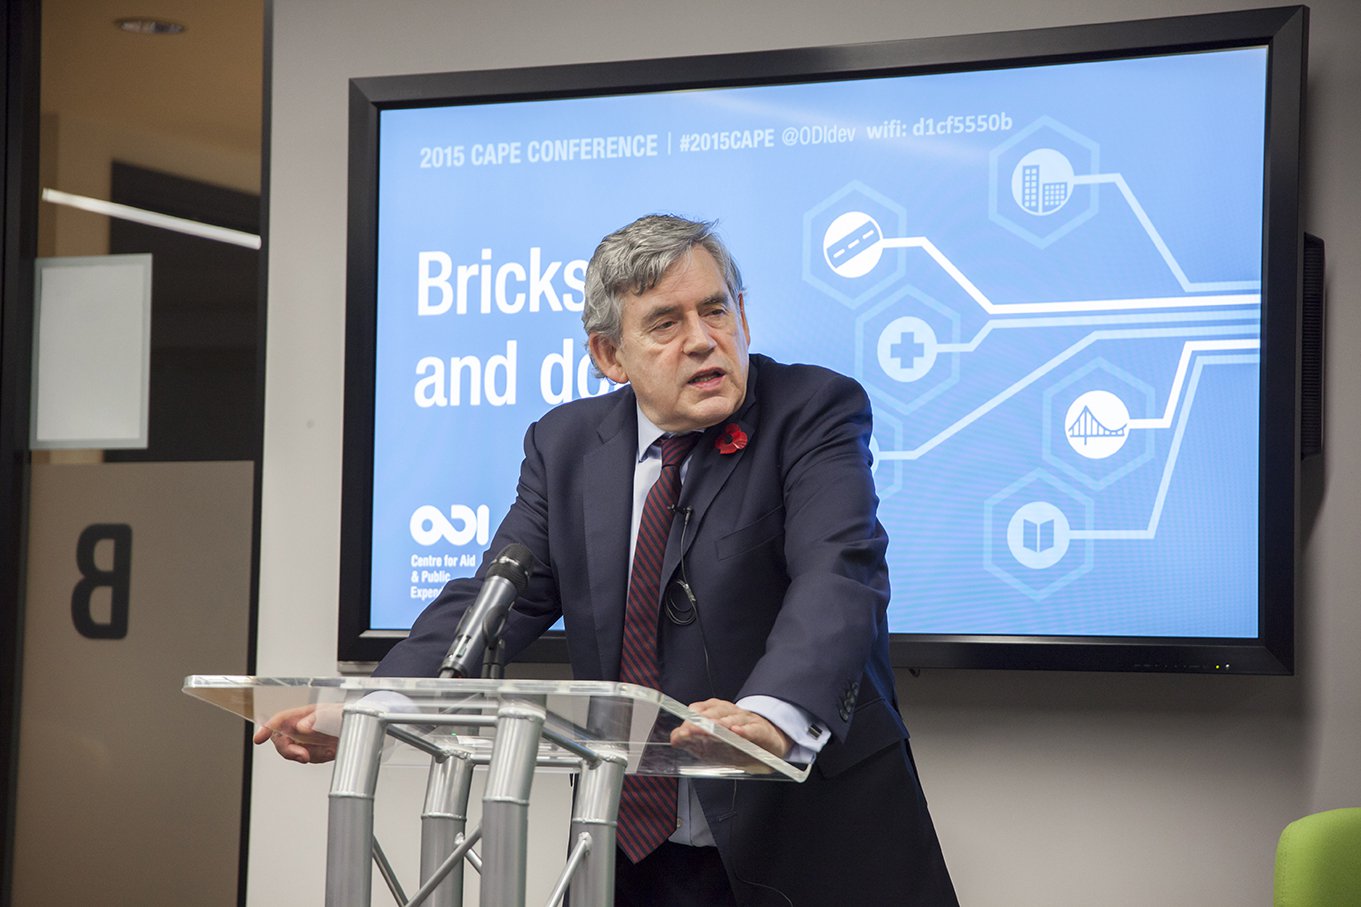 2015 CAPE conference: bricks and dollars